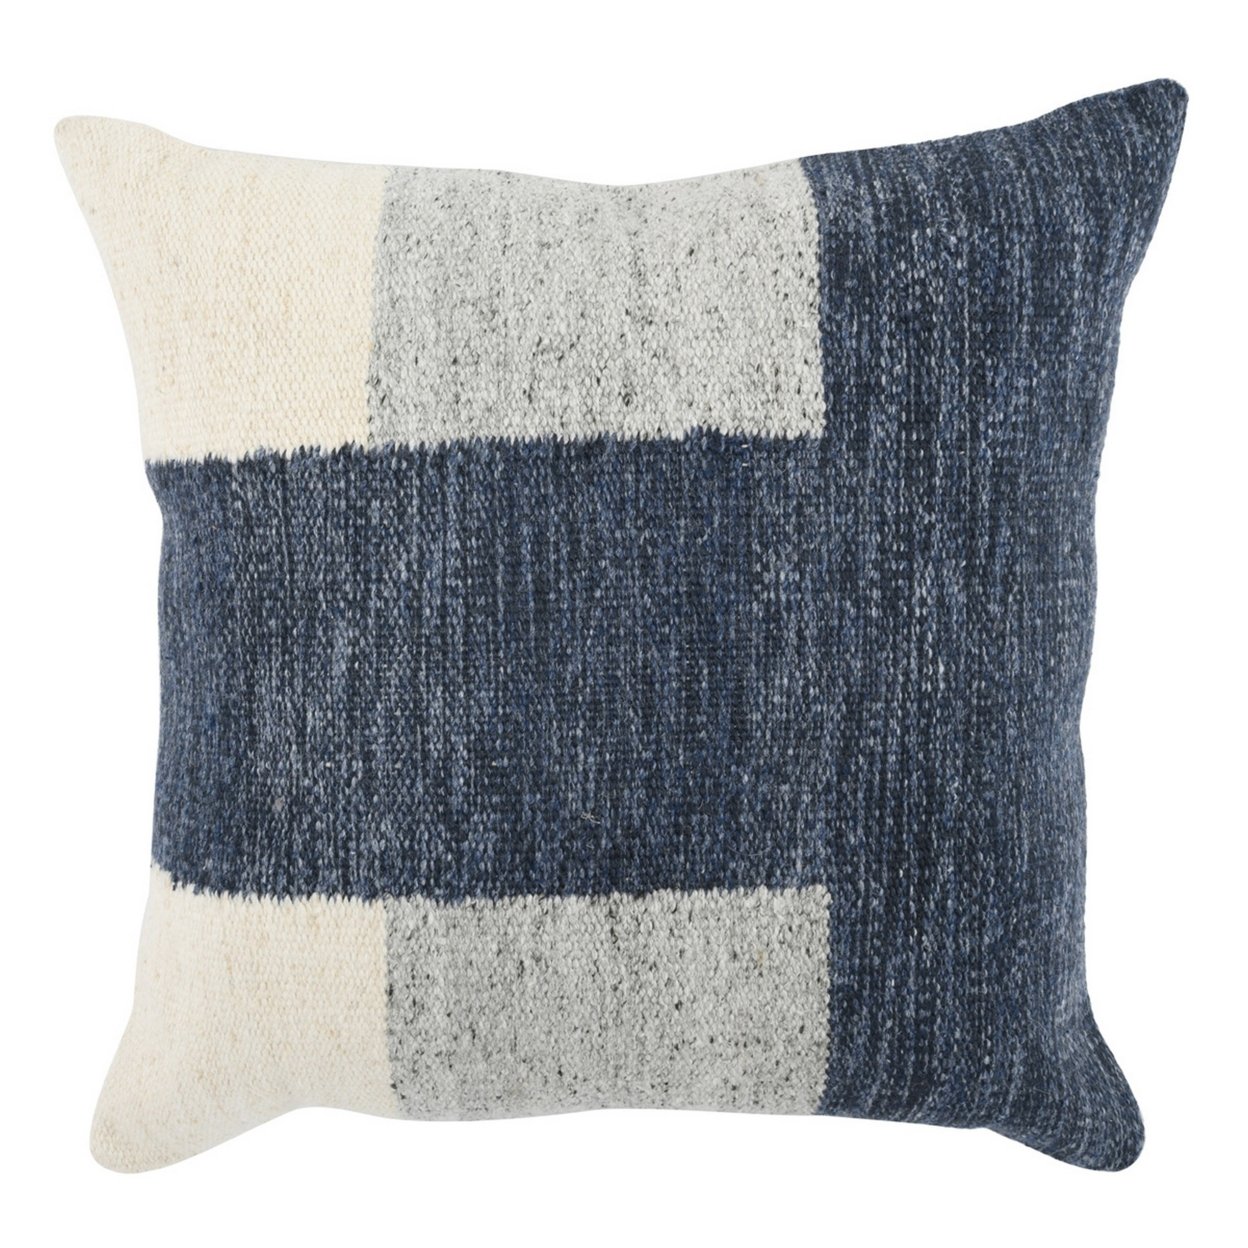 22 Inch Square Accent Throw Pillow, Color Block Pattern, Blue, Gray, White- Saltoro Sherpi